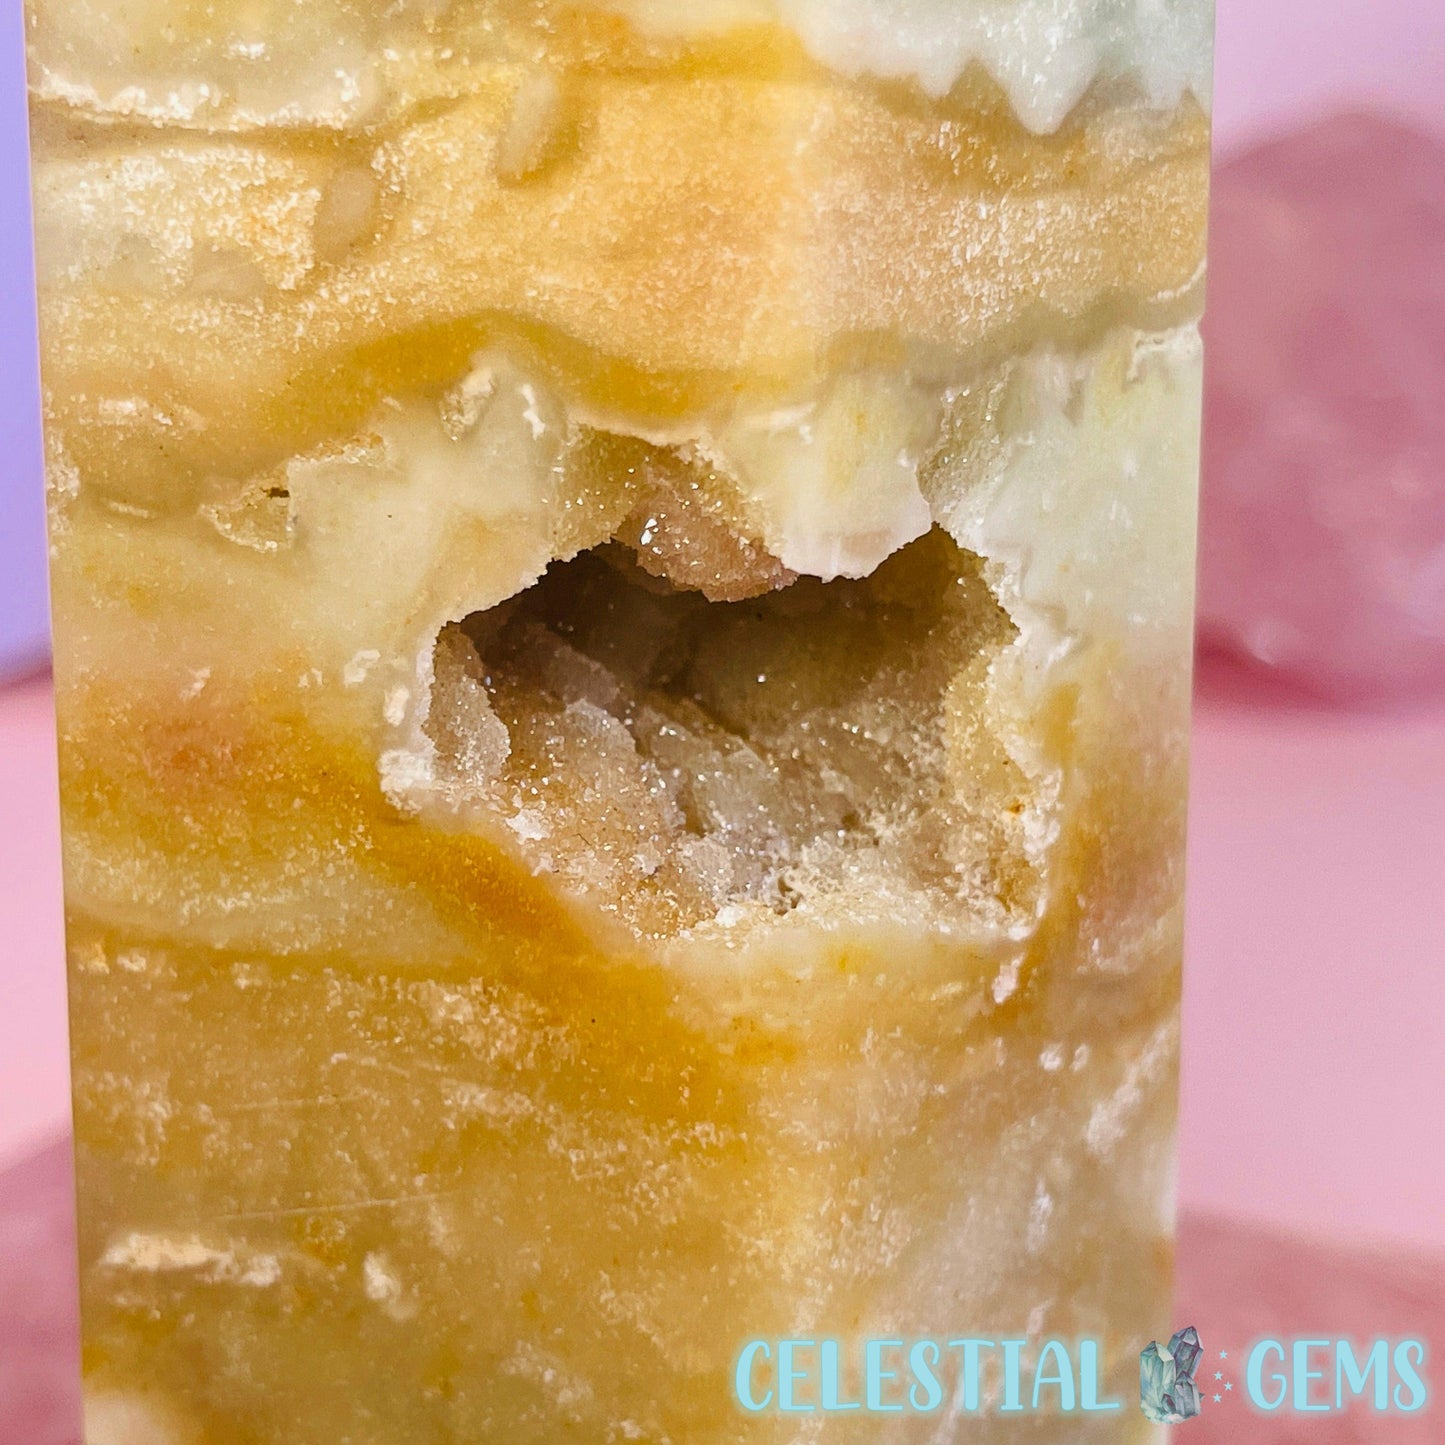 Caribbean Calcite Large Tower A (with Druzy!)